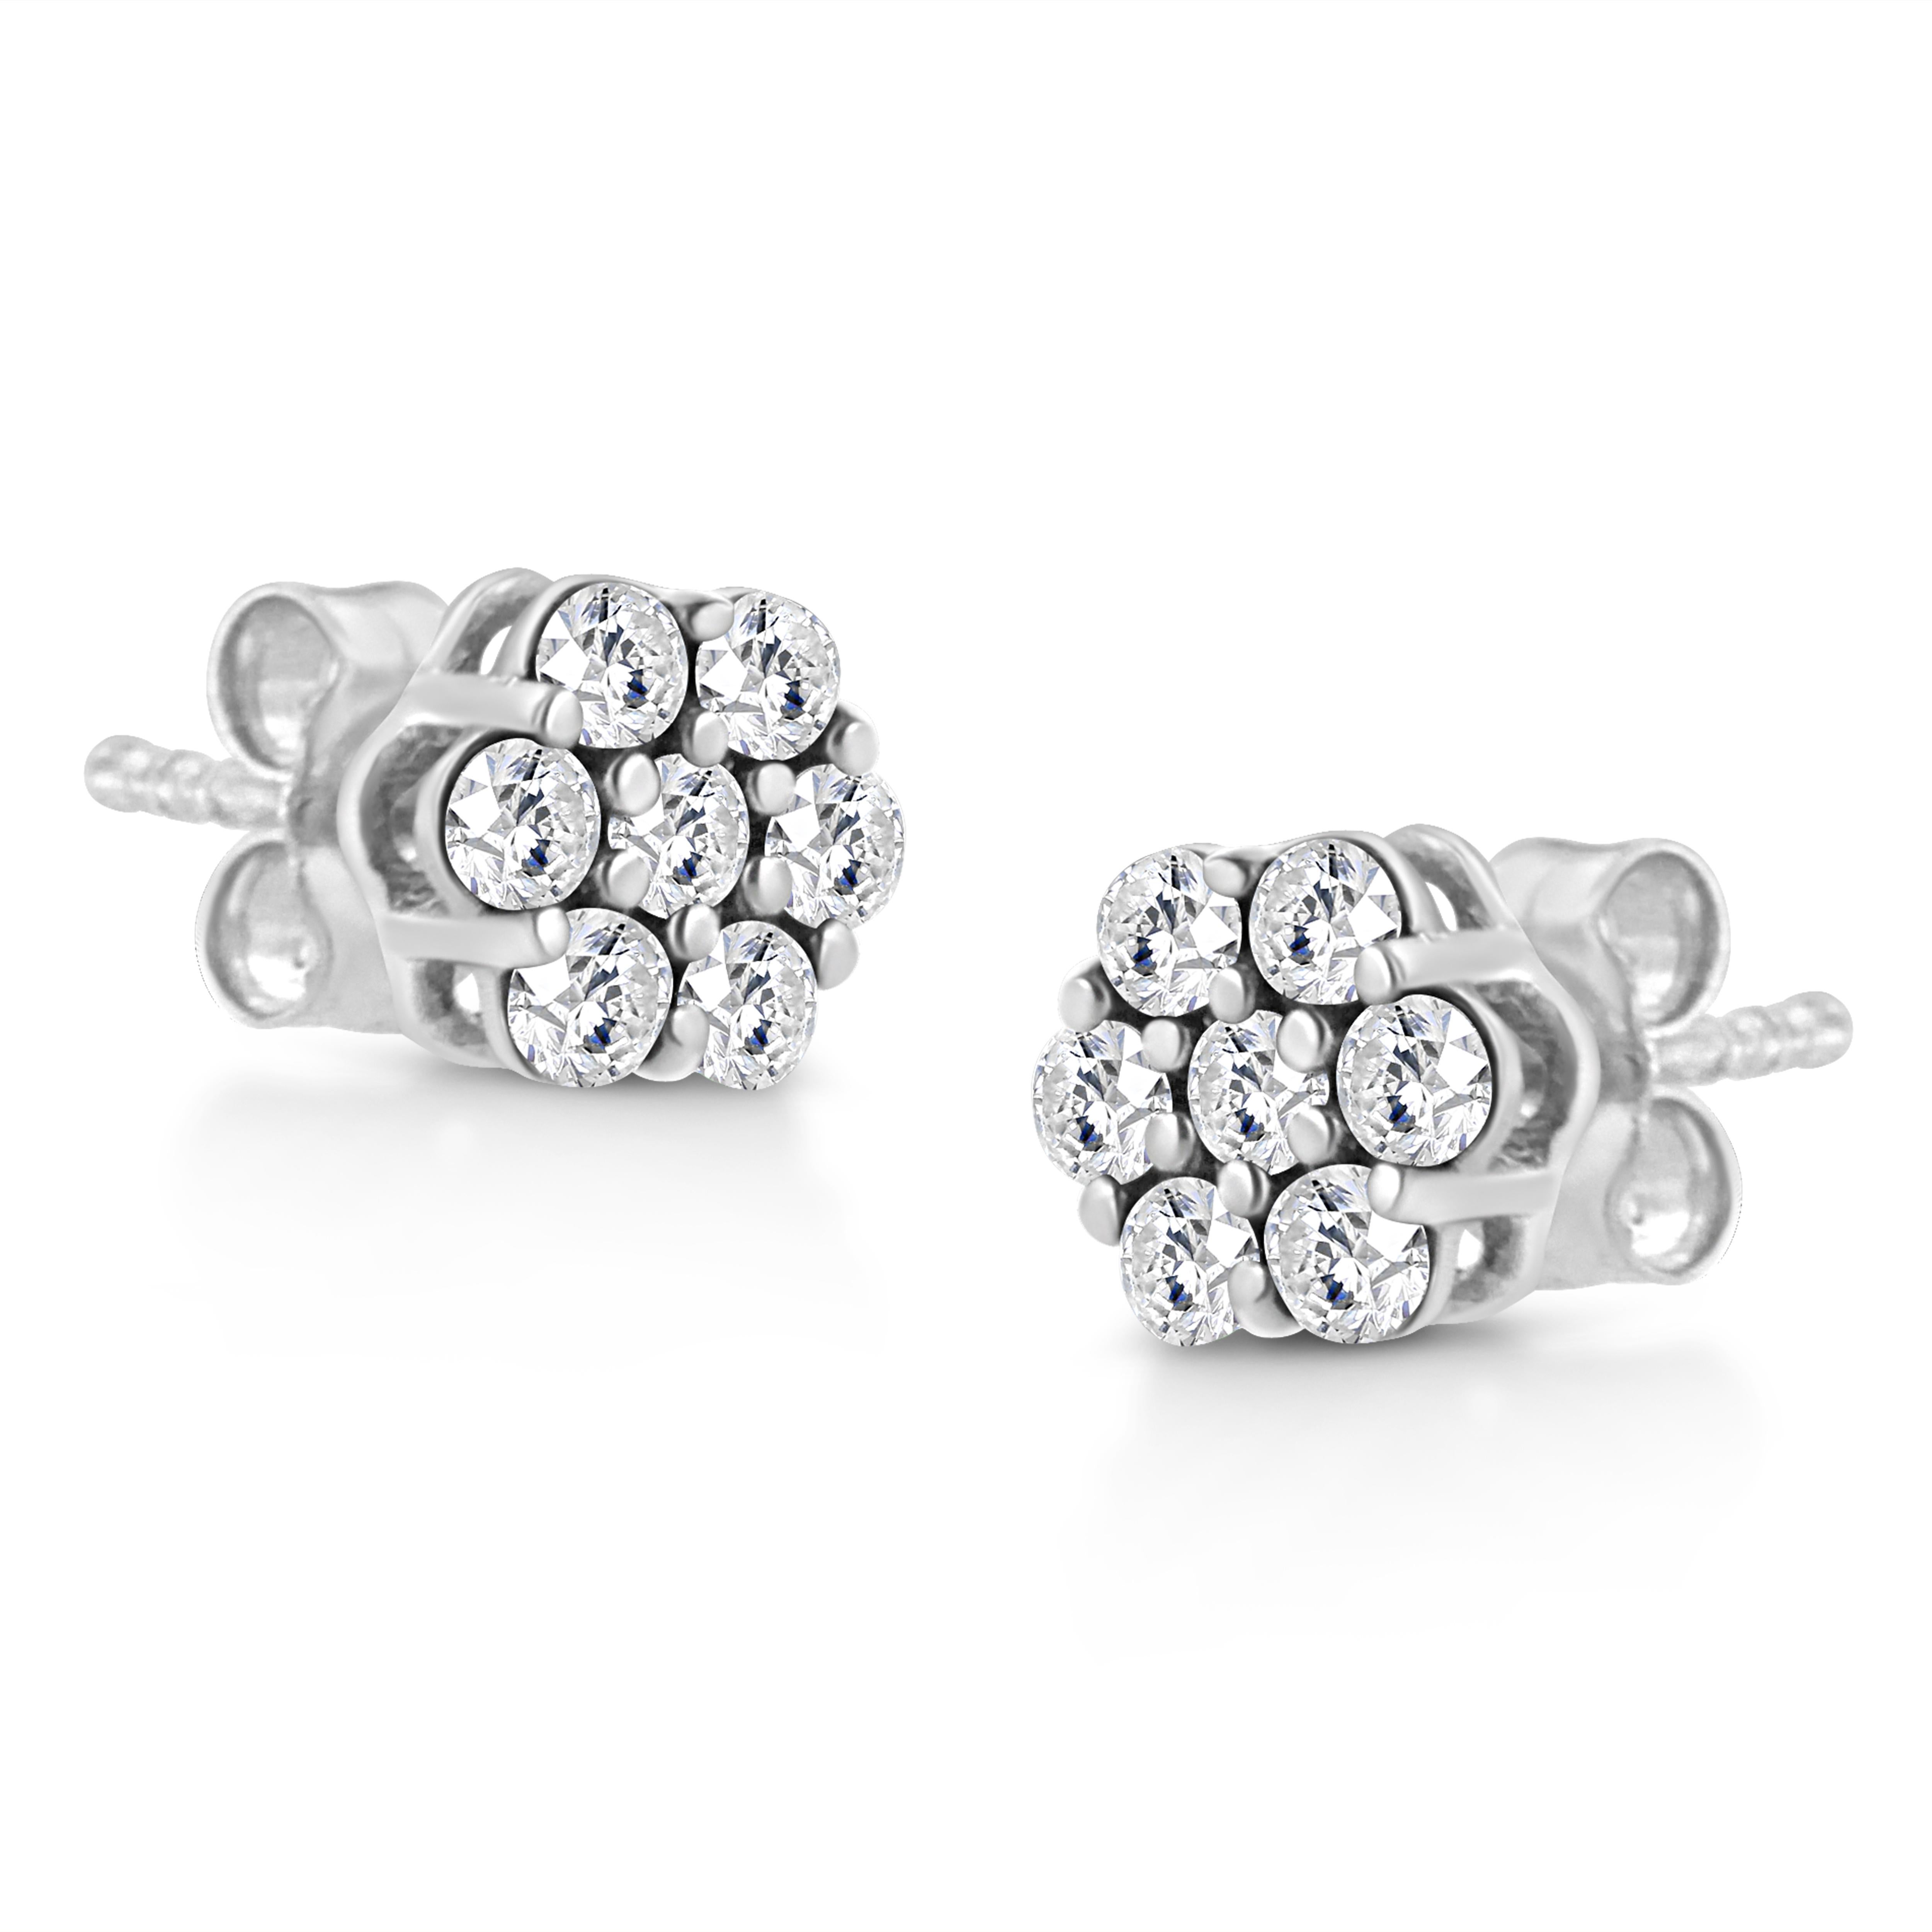 These gorgeous floral cluster stud earrings are the perfect piece to add to your jewelry collection. Created in the finest 14k white gold, these studs boast 7 natural round-cut diamonds in an elegant prong setting. Boasting a total carat weight of